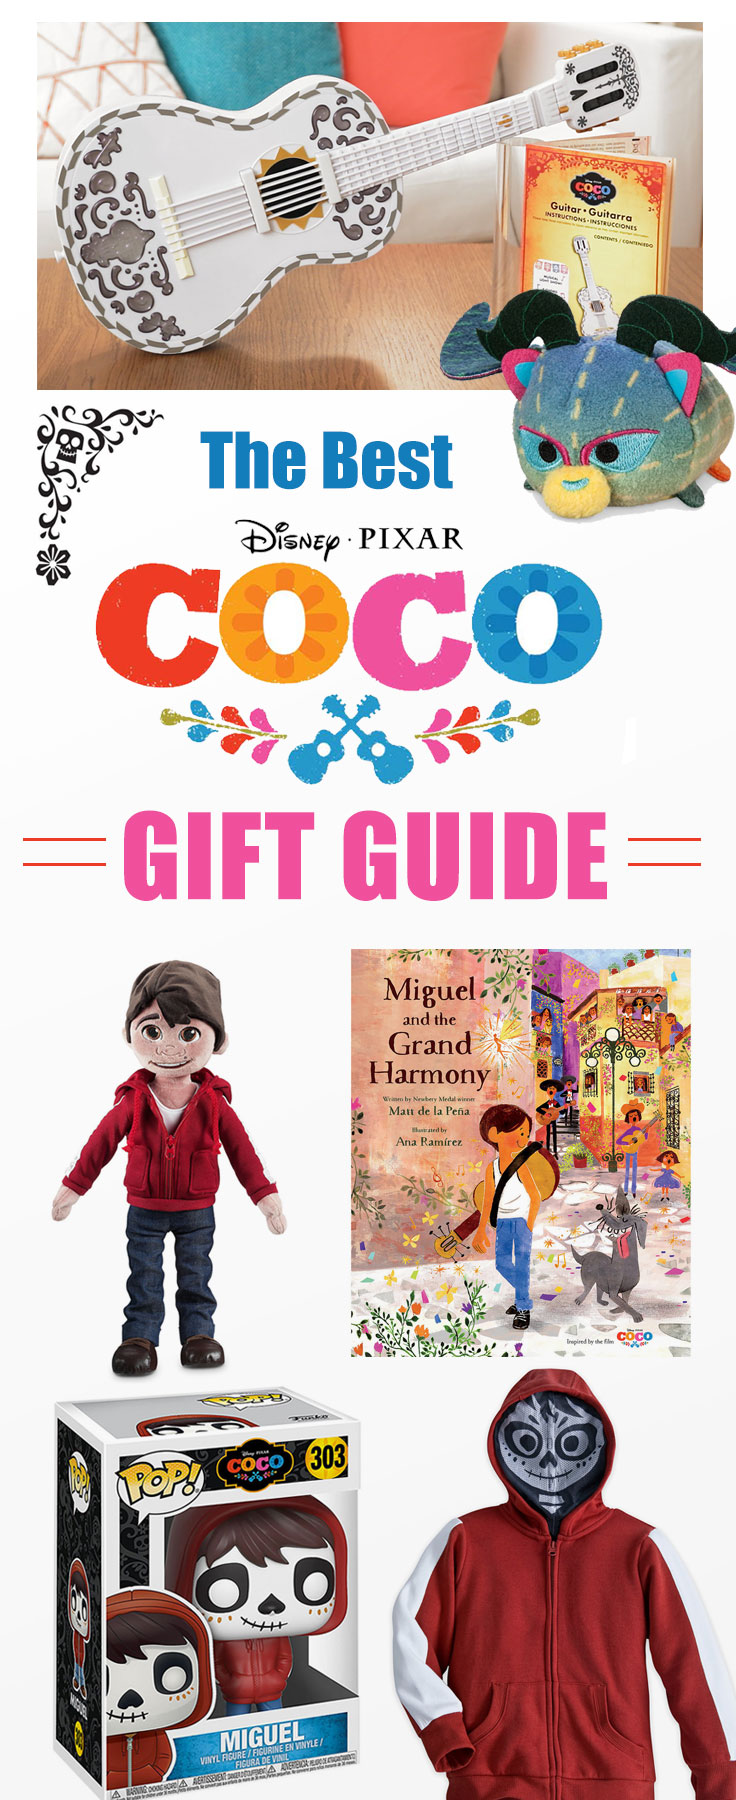 The Best Disney Pixar Coco Gift guide